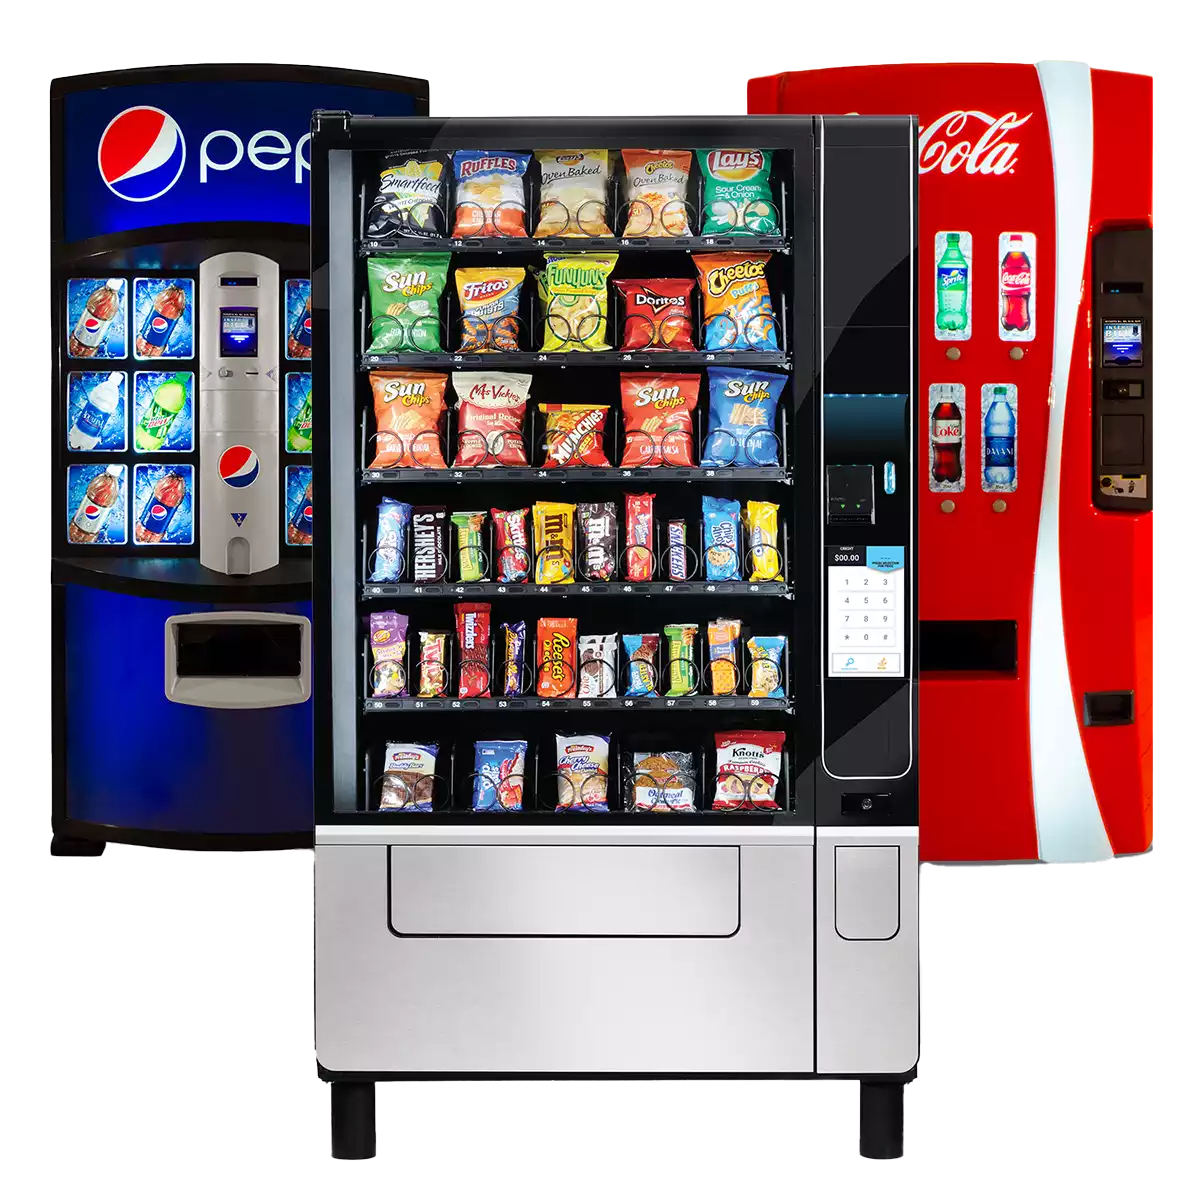 Vending Machine Companies Near Me, serving businesses throughout the United States